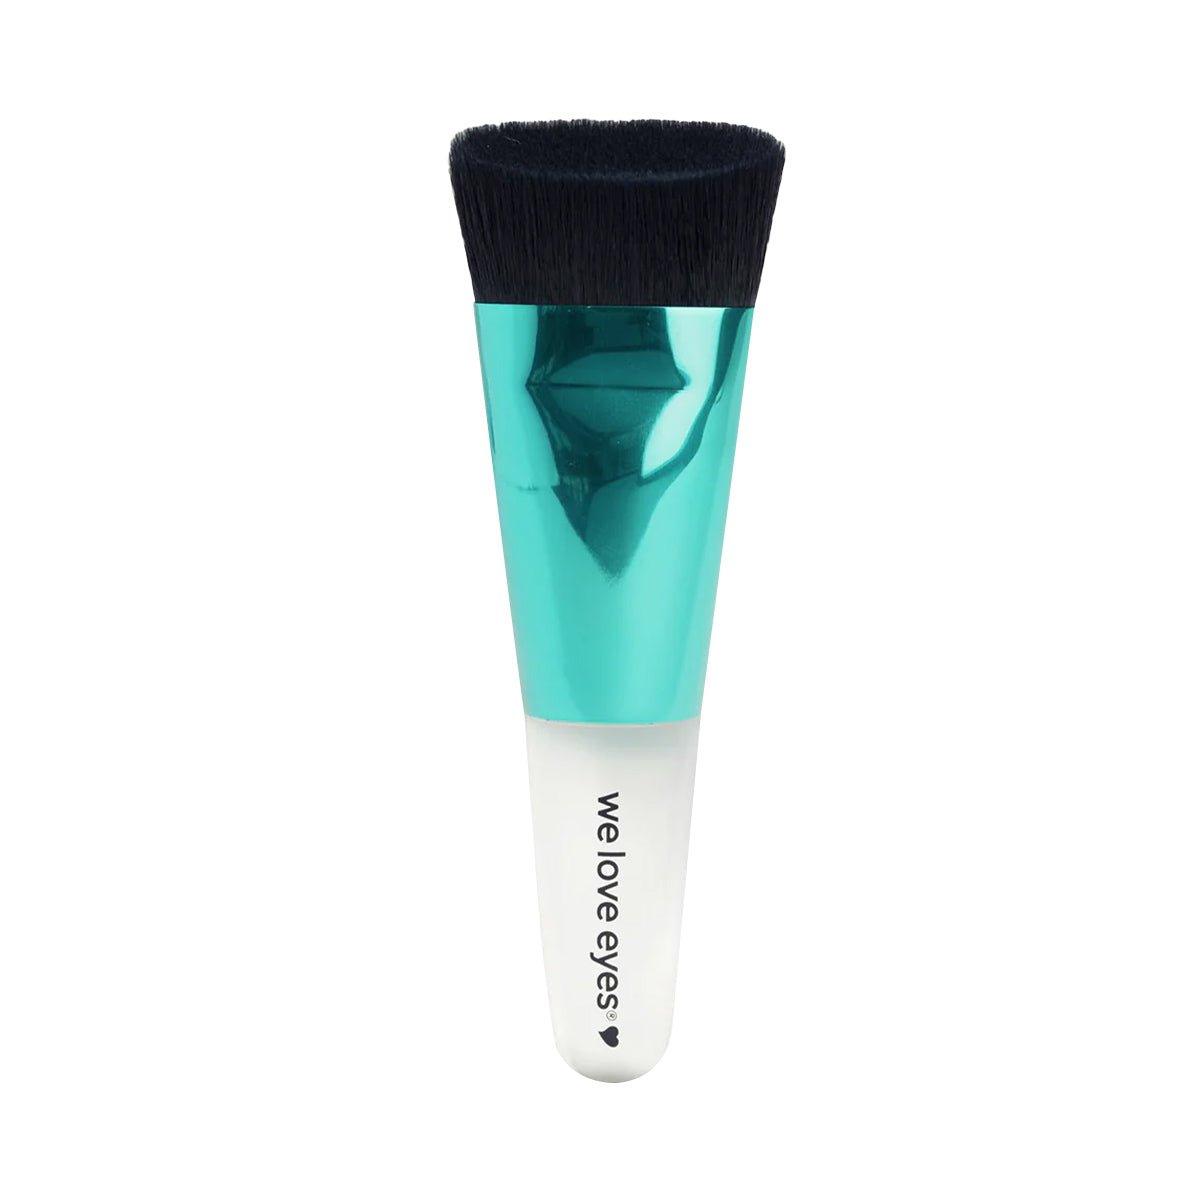 We Love Eyes - Lashfull Thinking lash and brow cleansing brush (oil Not Included) - Dryeye Rescue